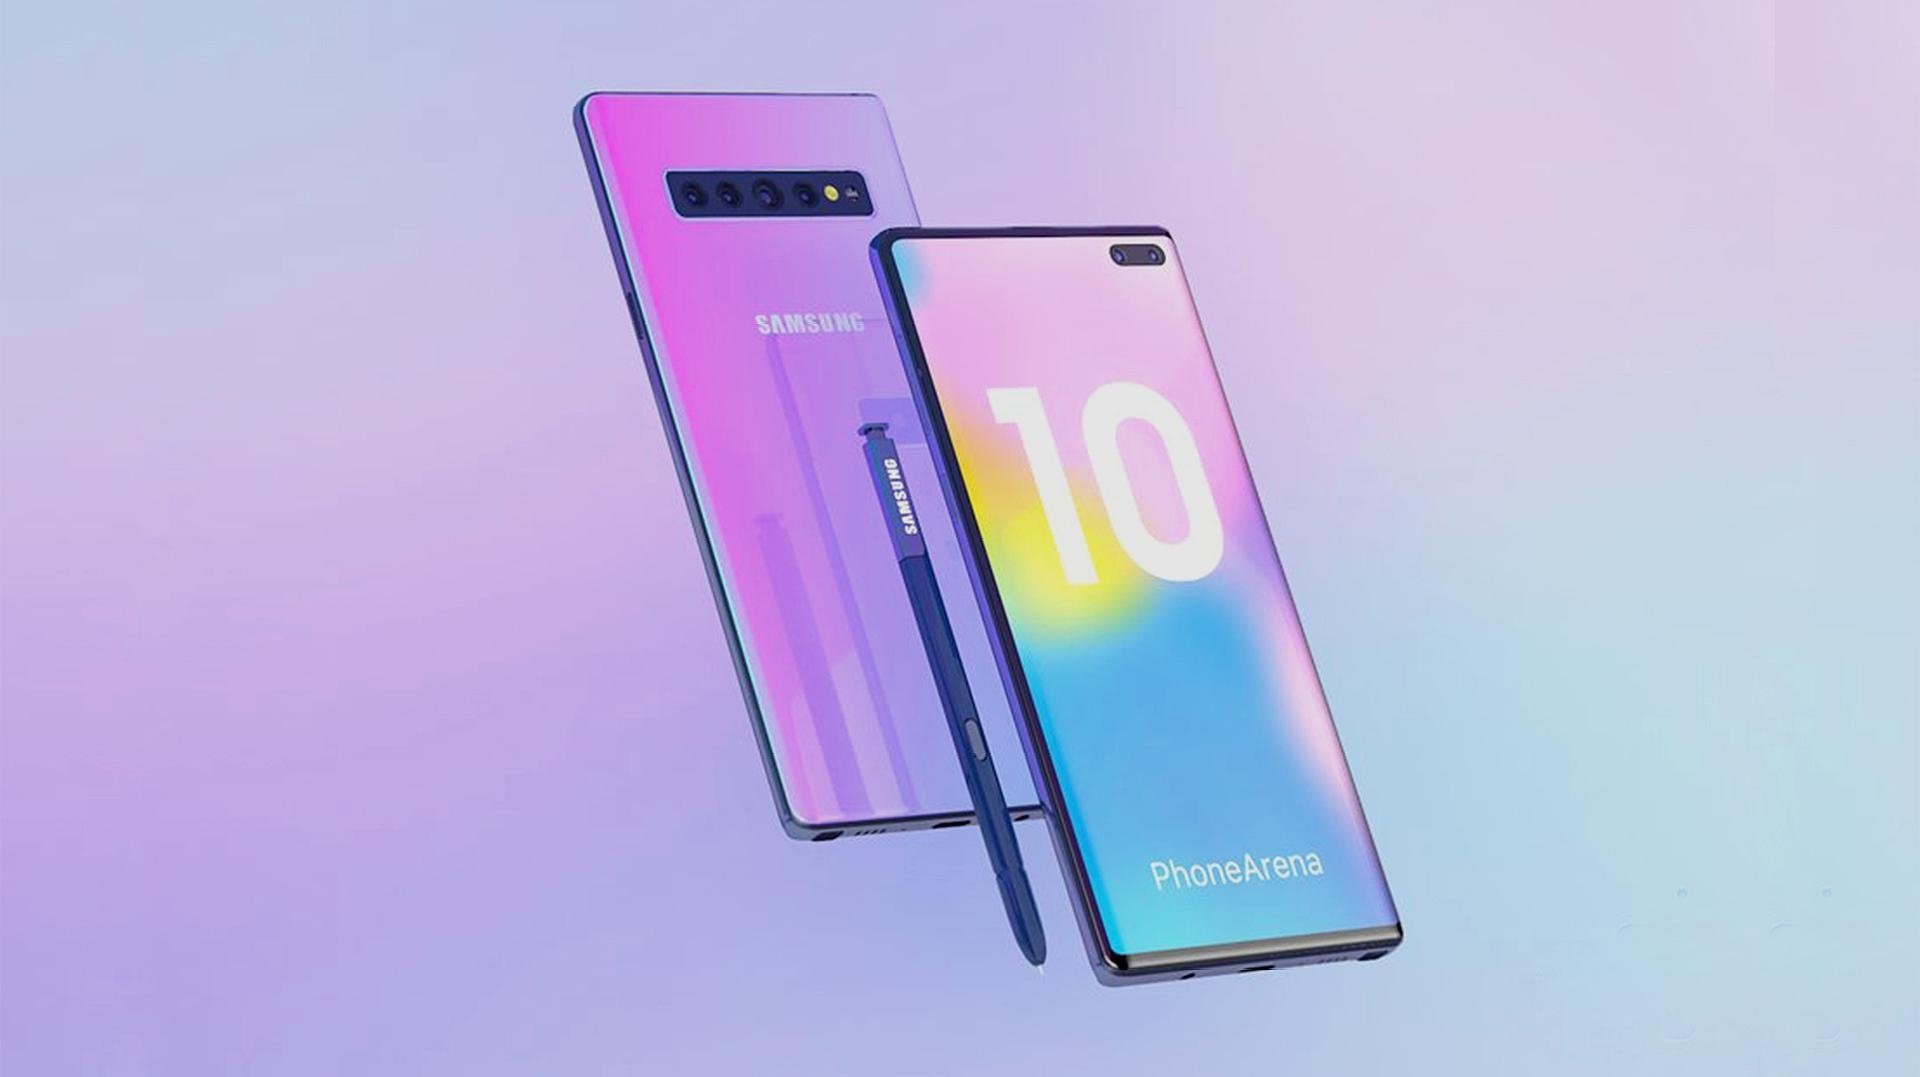 Galaxy s10 note. Samsung s10 Note. Galaxy Note 10. Samsung Galaxy Note 10+. Samsung Note 10 Pro.